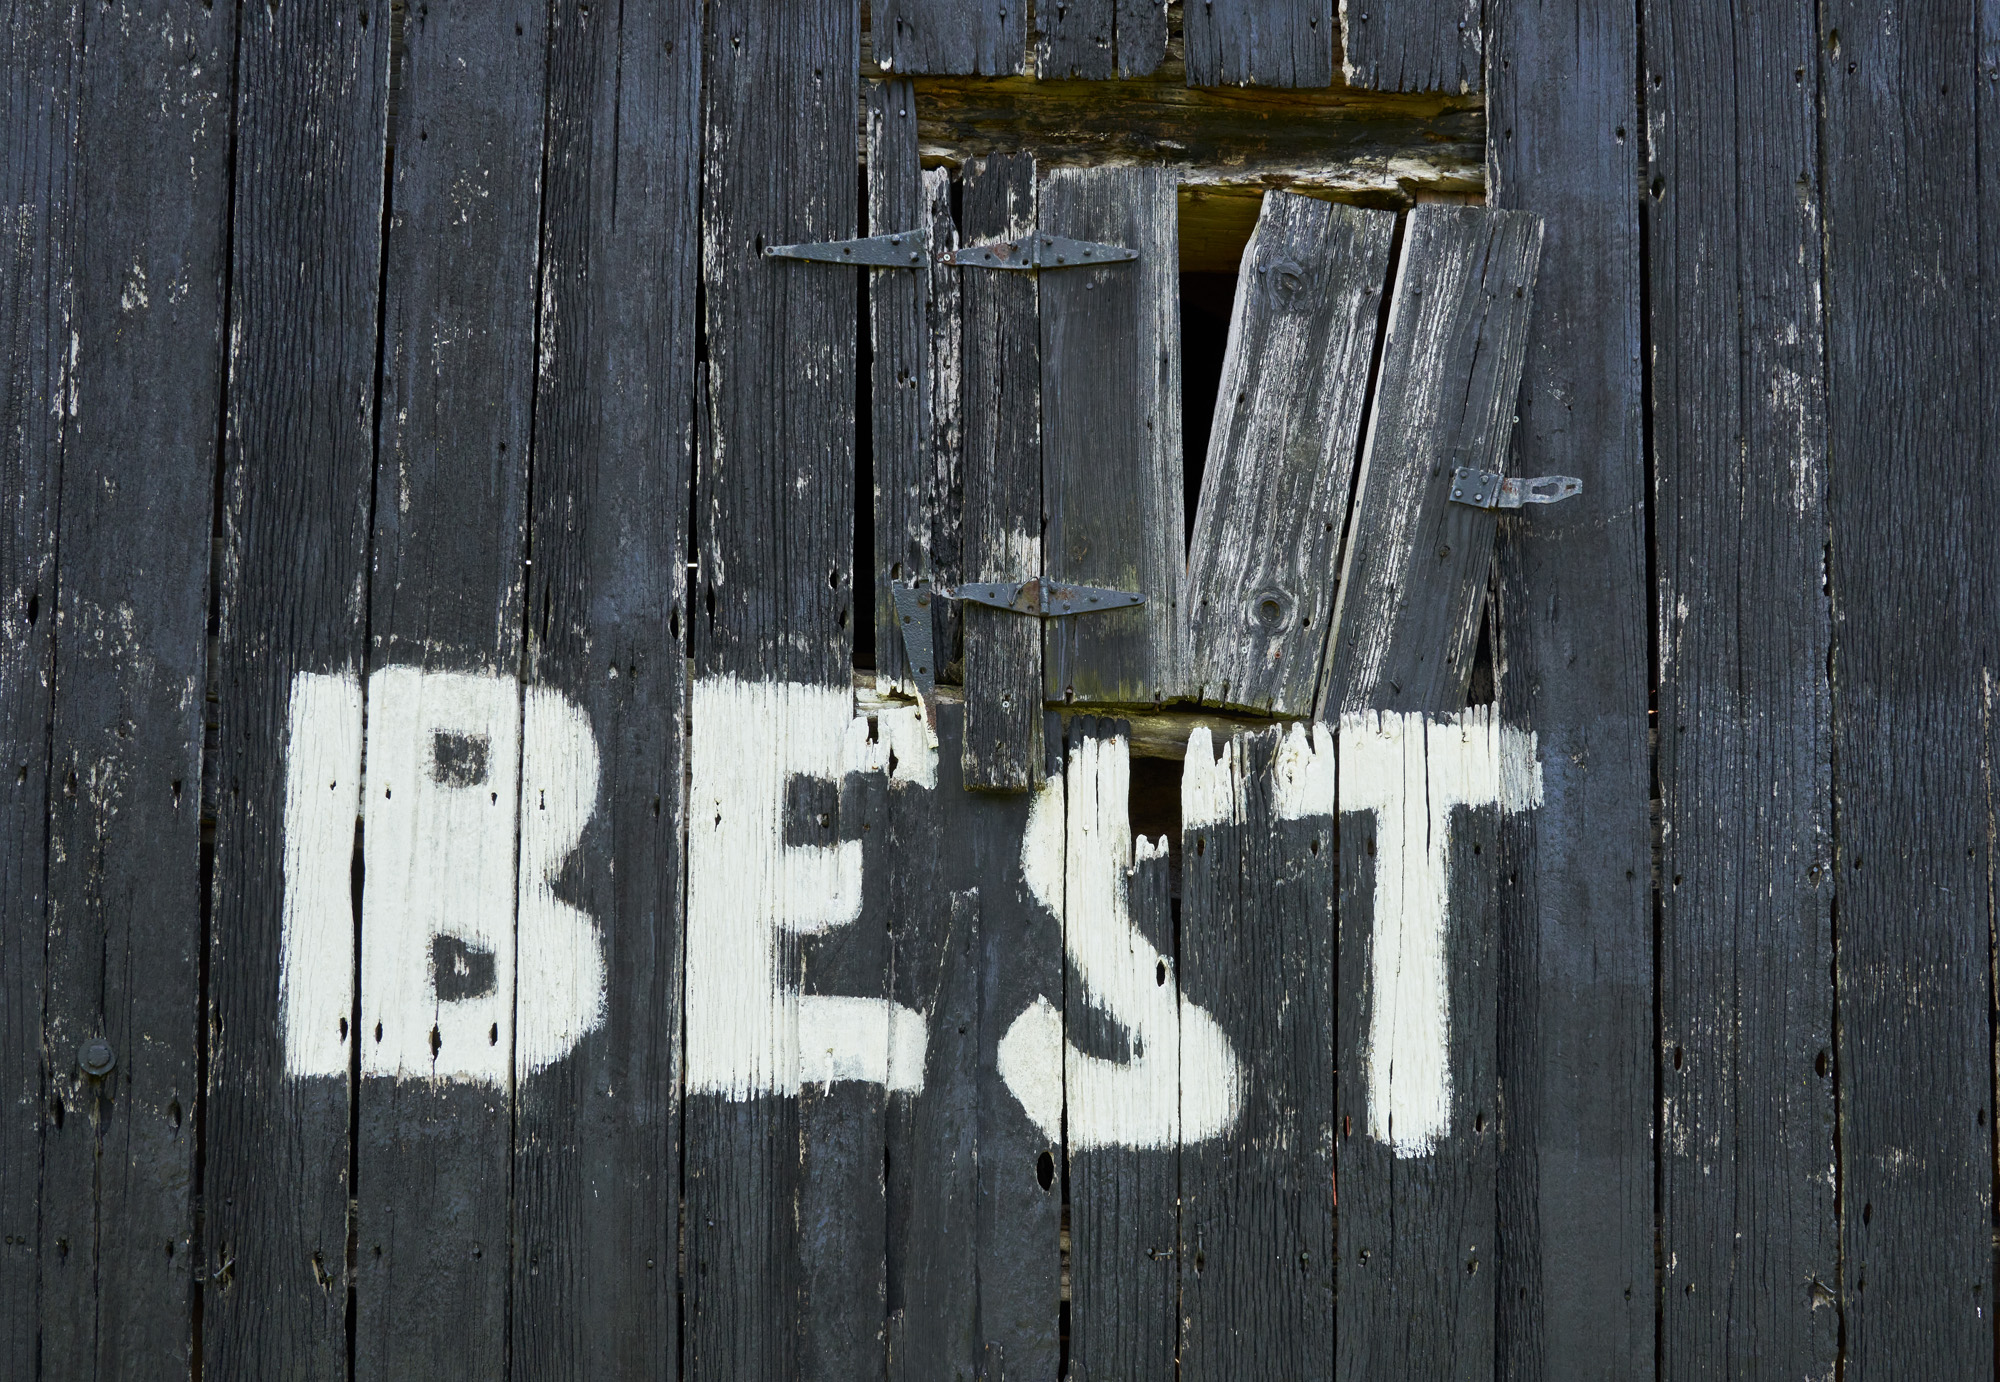 I loved the way the painted word best looked with the shutters